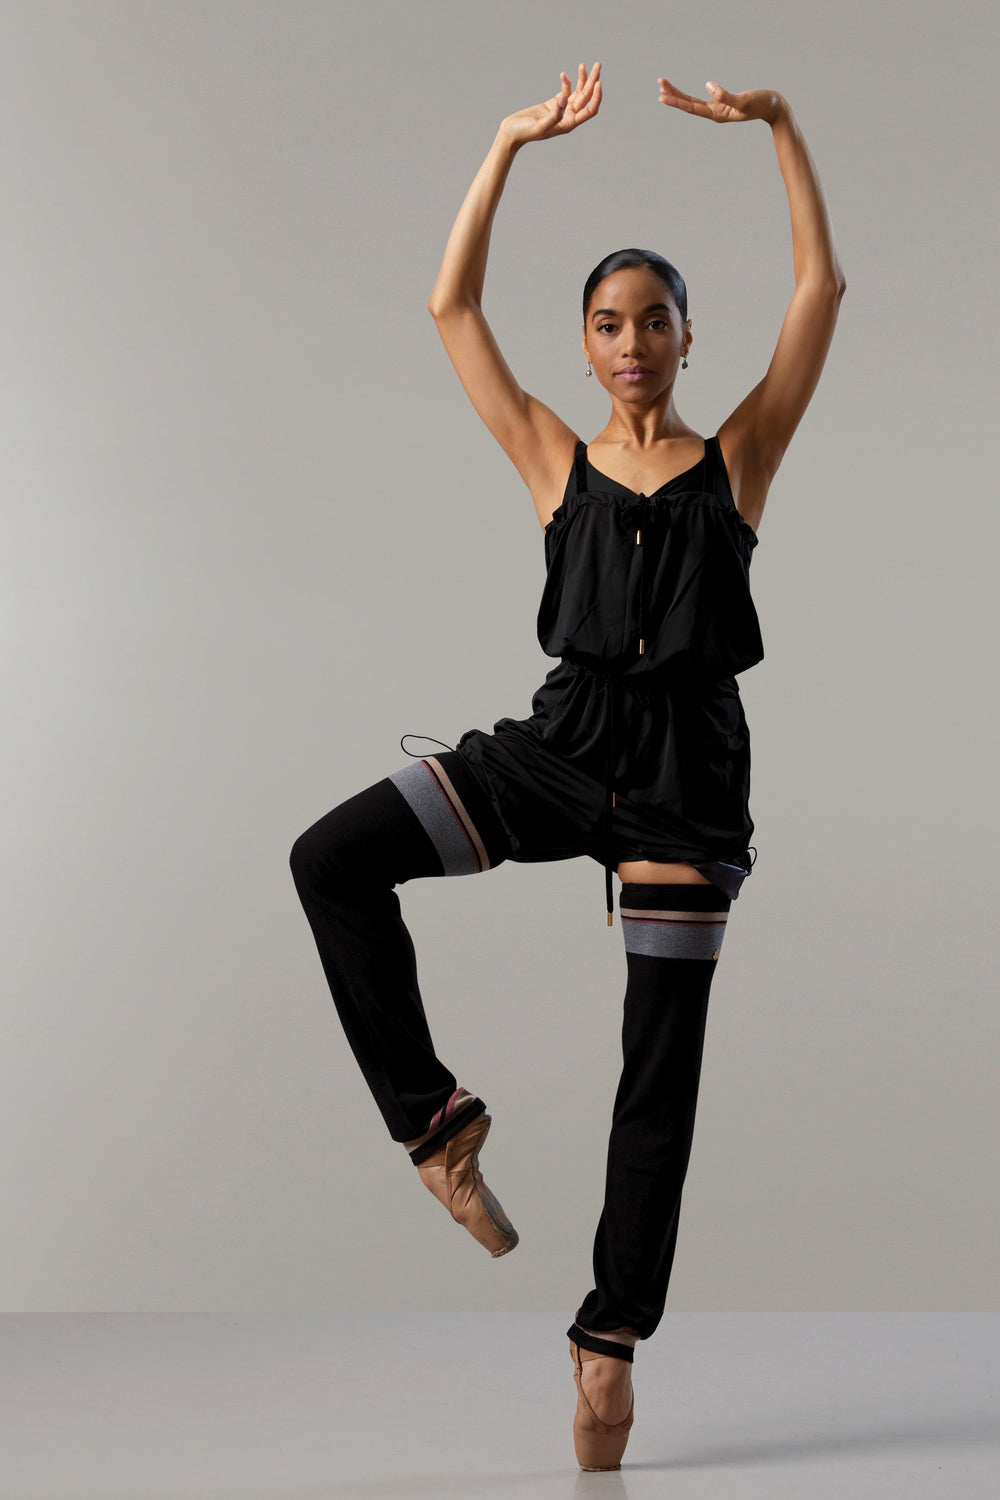 Adult Ballet Warm-Up Pants with Suspenders - Sweat-Enhancing Wood Ear  Design for Dance Training & Weight Loss